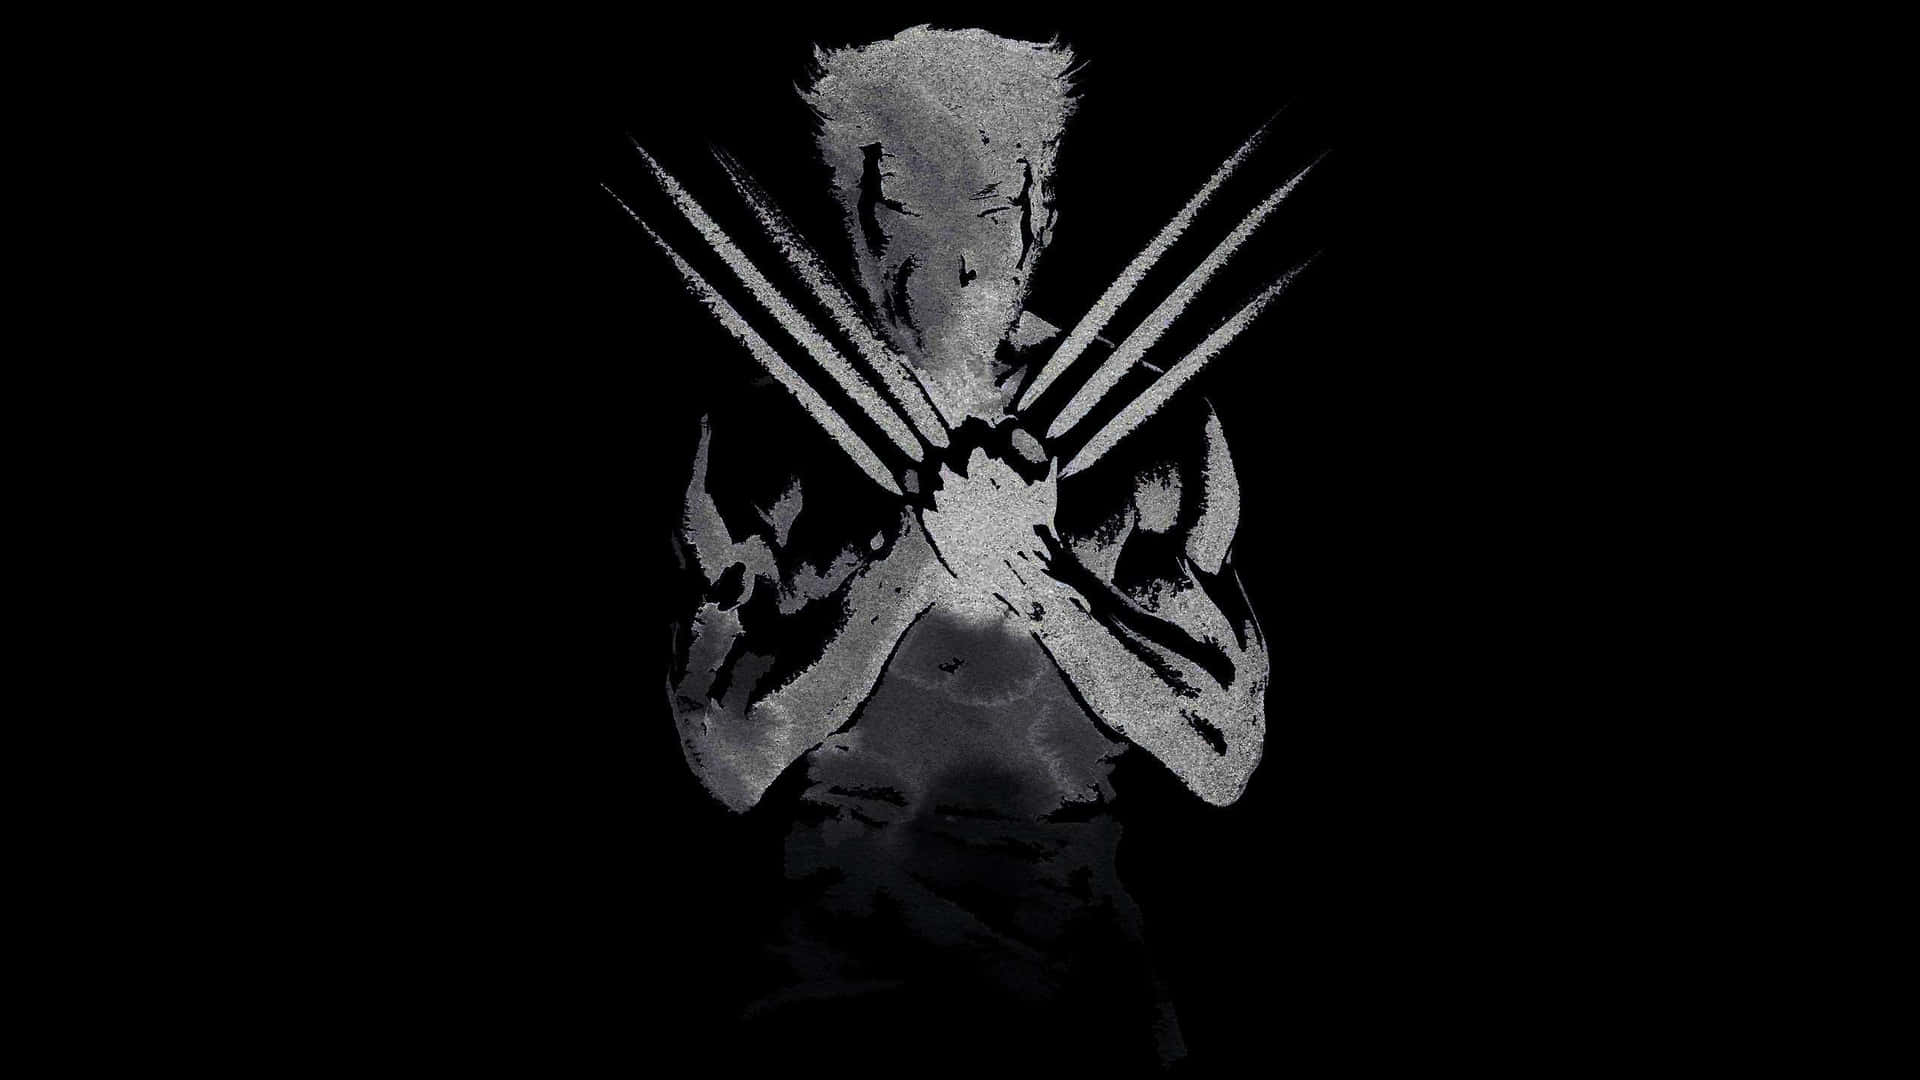 “Unleash the power of Wolverine!”